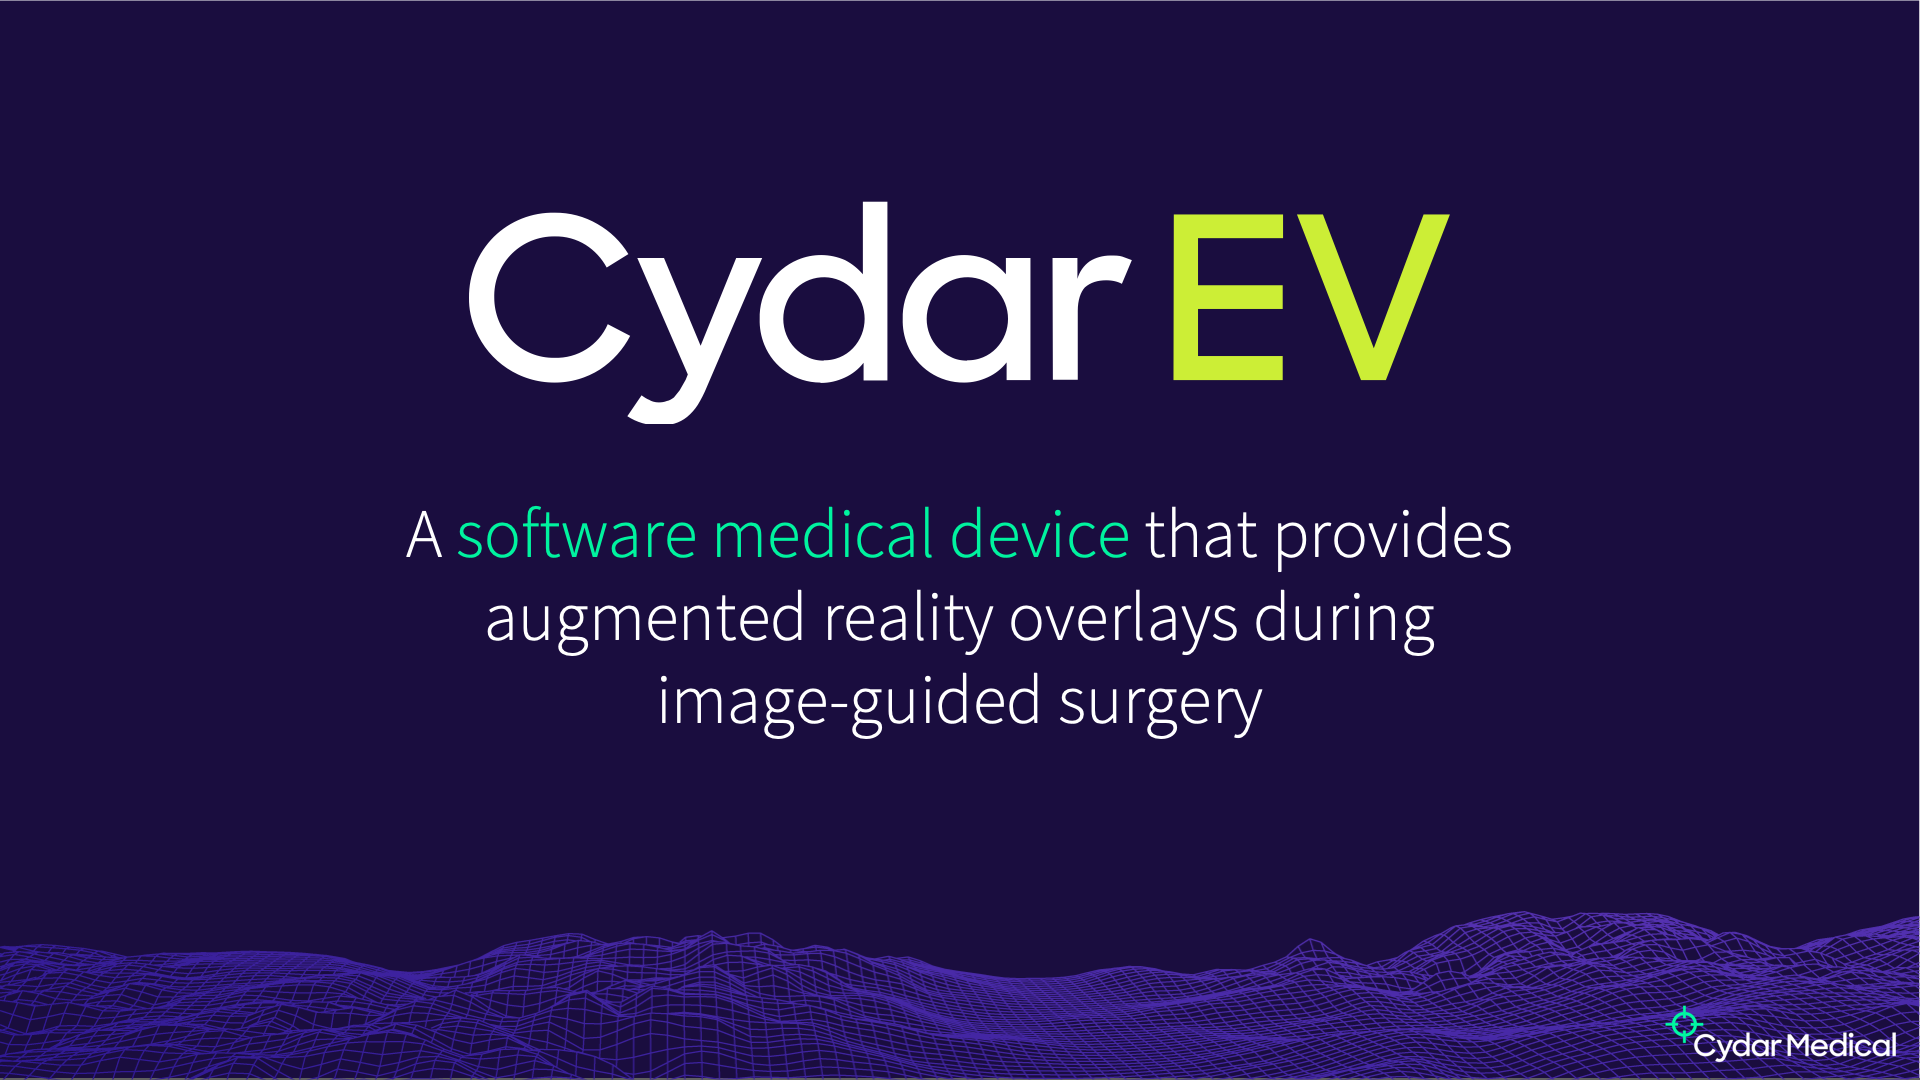 Cydar EV: A SOFTWARE MEDICAL DEVICE that provides augmented reality overlays during image guided surgery